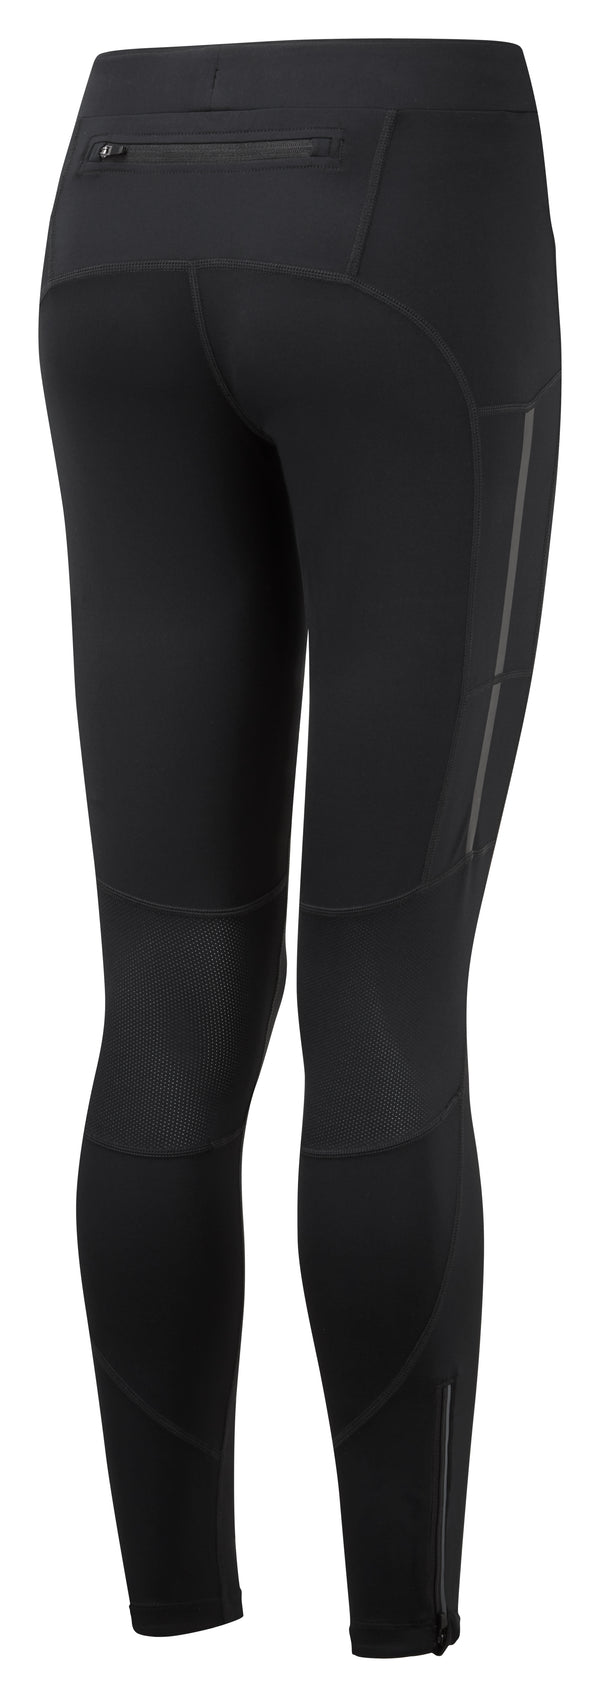 Ronhill | Wmn's Tech Revive Stretch Tight | All Black | XS